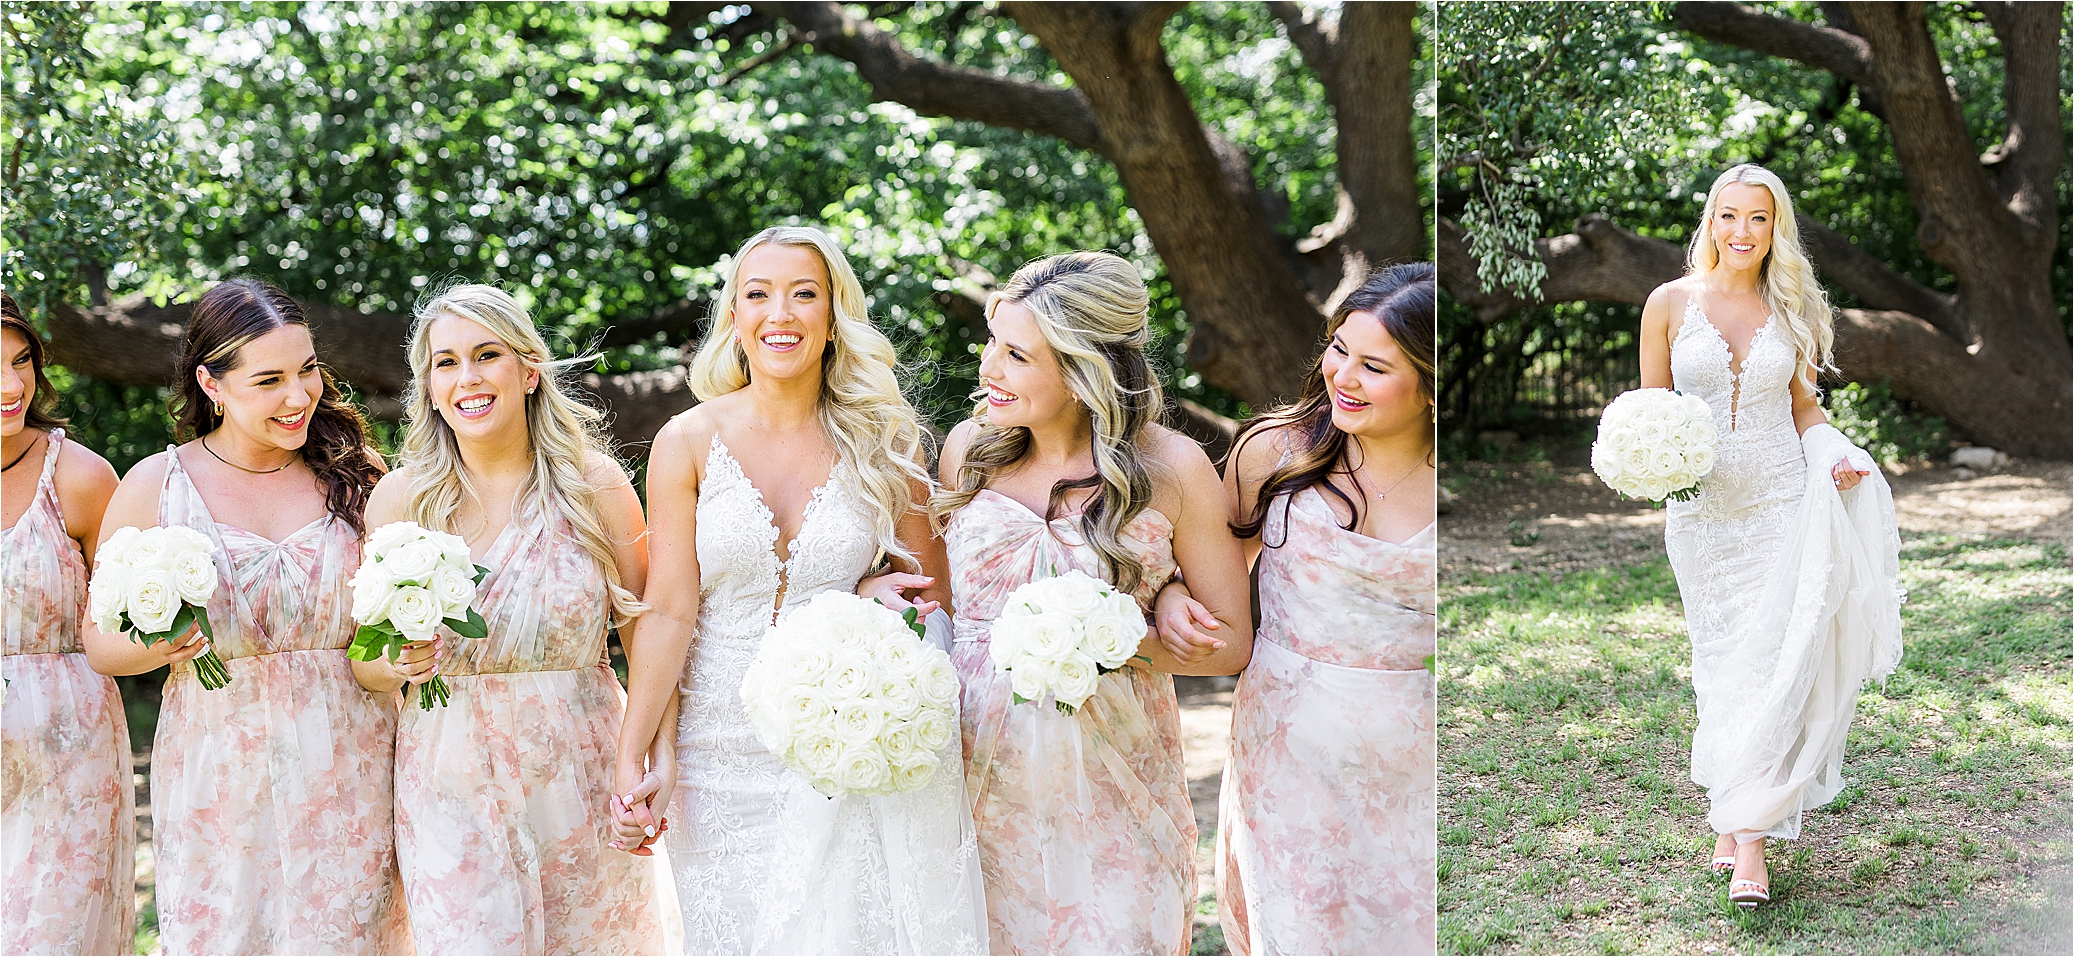 A bride smiles and holds her dress as she walks with her bridesmaids during portraits for her Brodie Homestead Wedding in Austin, Texas